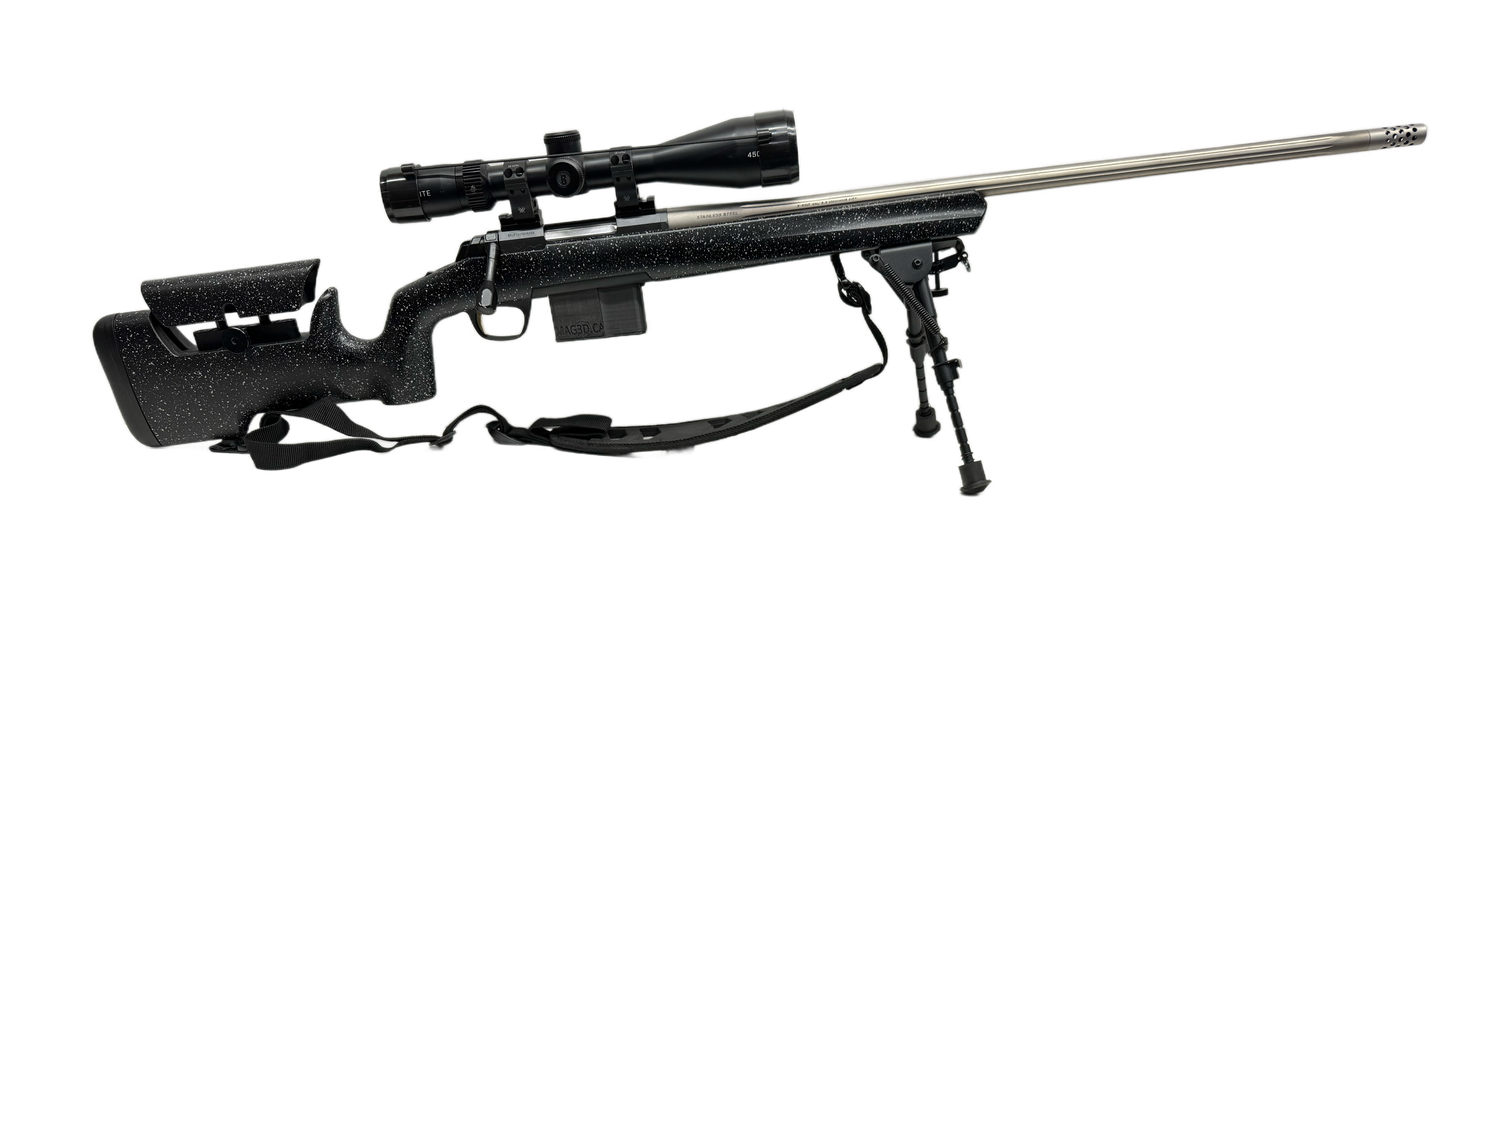 CG-0136 CONSIGNMENT Browning X-Bolt Long Range Max Bolt Action Rifle 6.5 Creedmoor 1 in 7" Twist Rate Barrel w/ Bushnell Elite 4500 4-16x50 Scope, Bipod & Sling